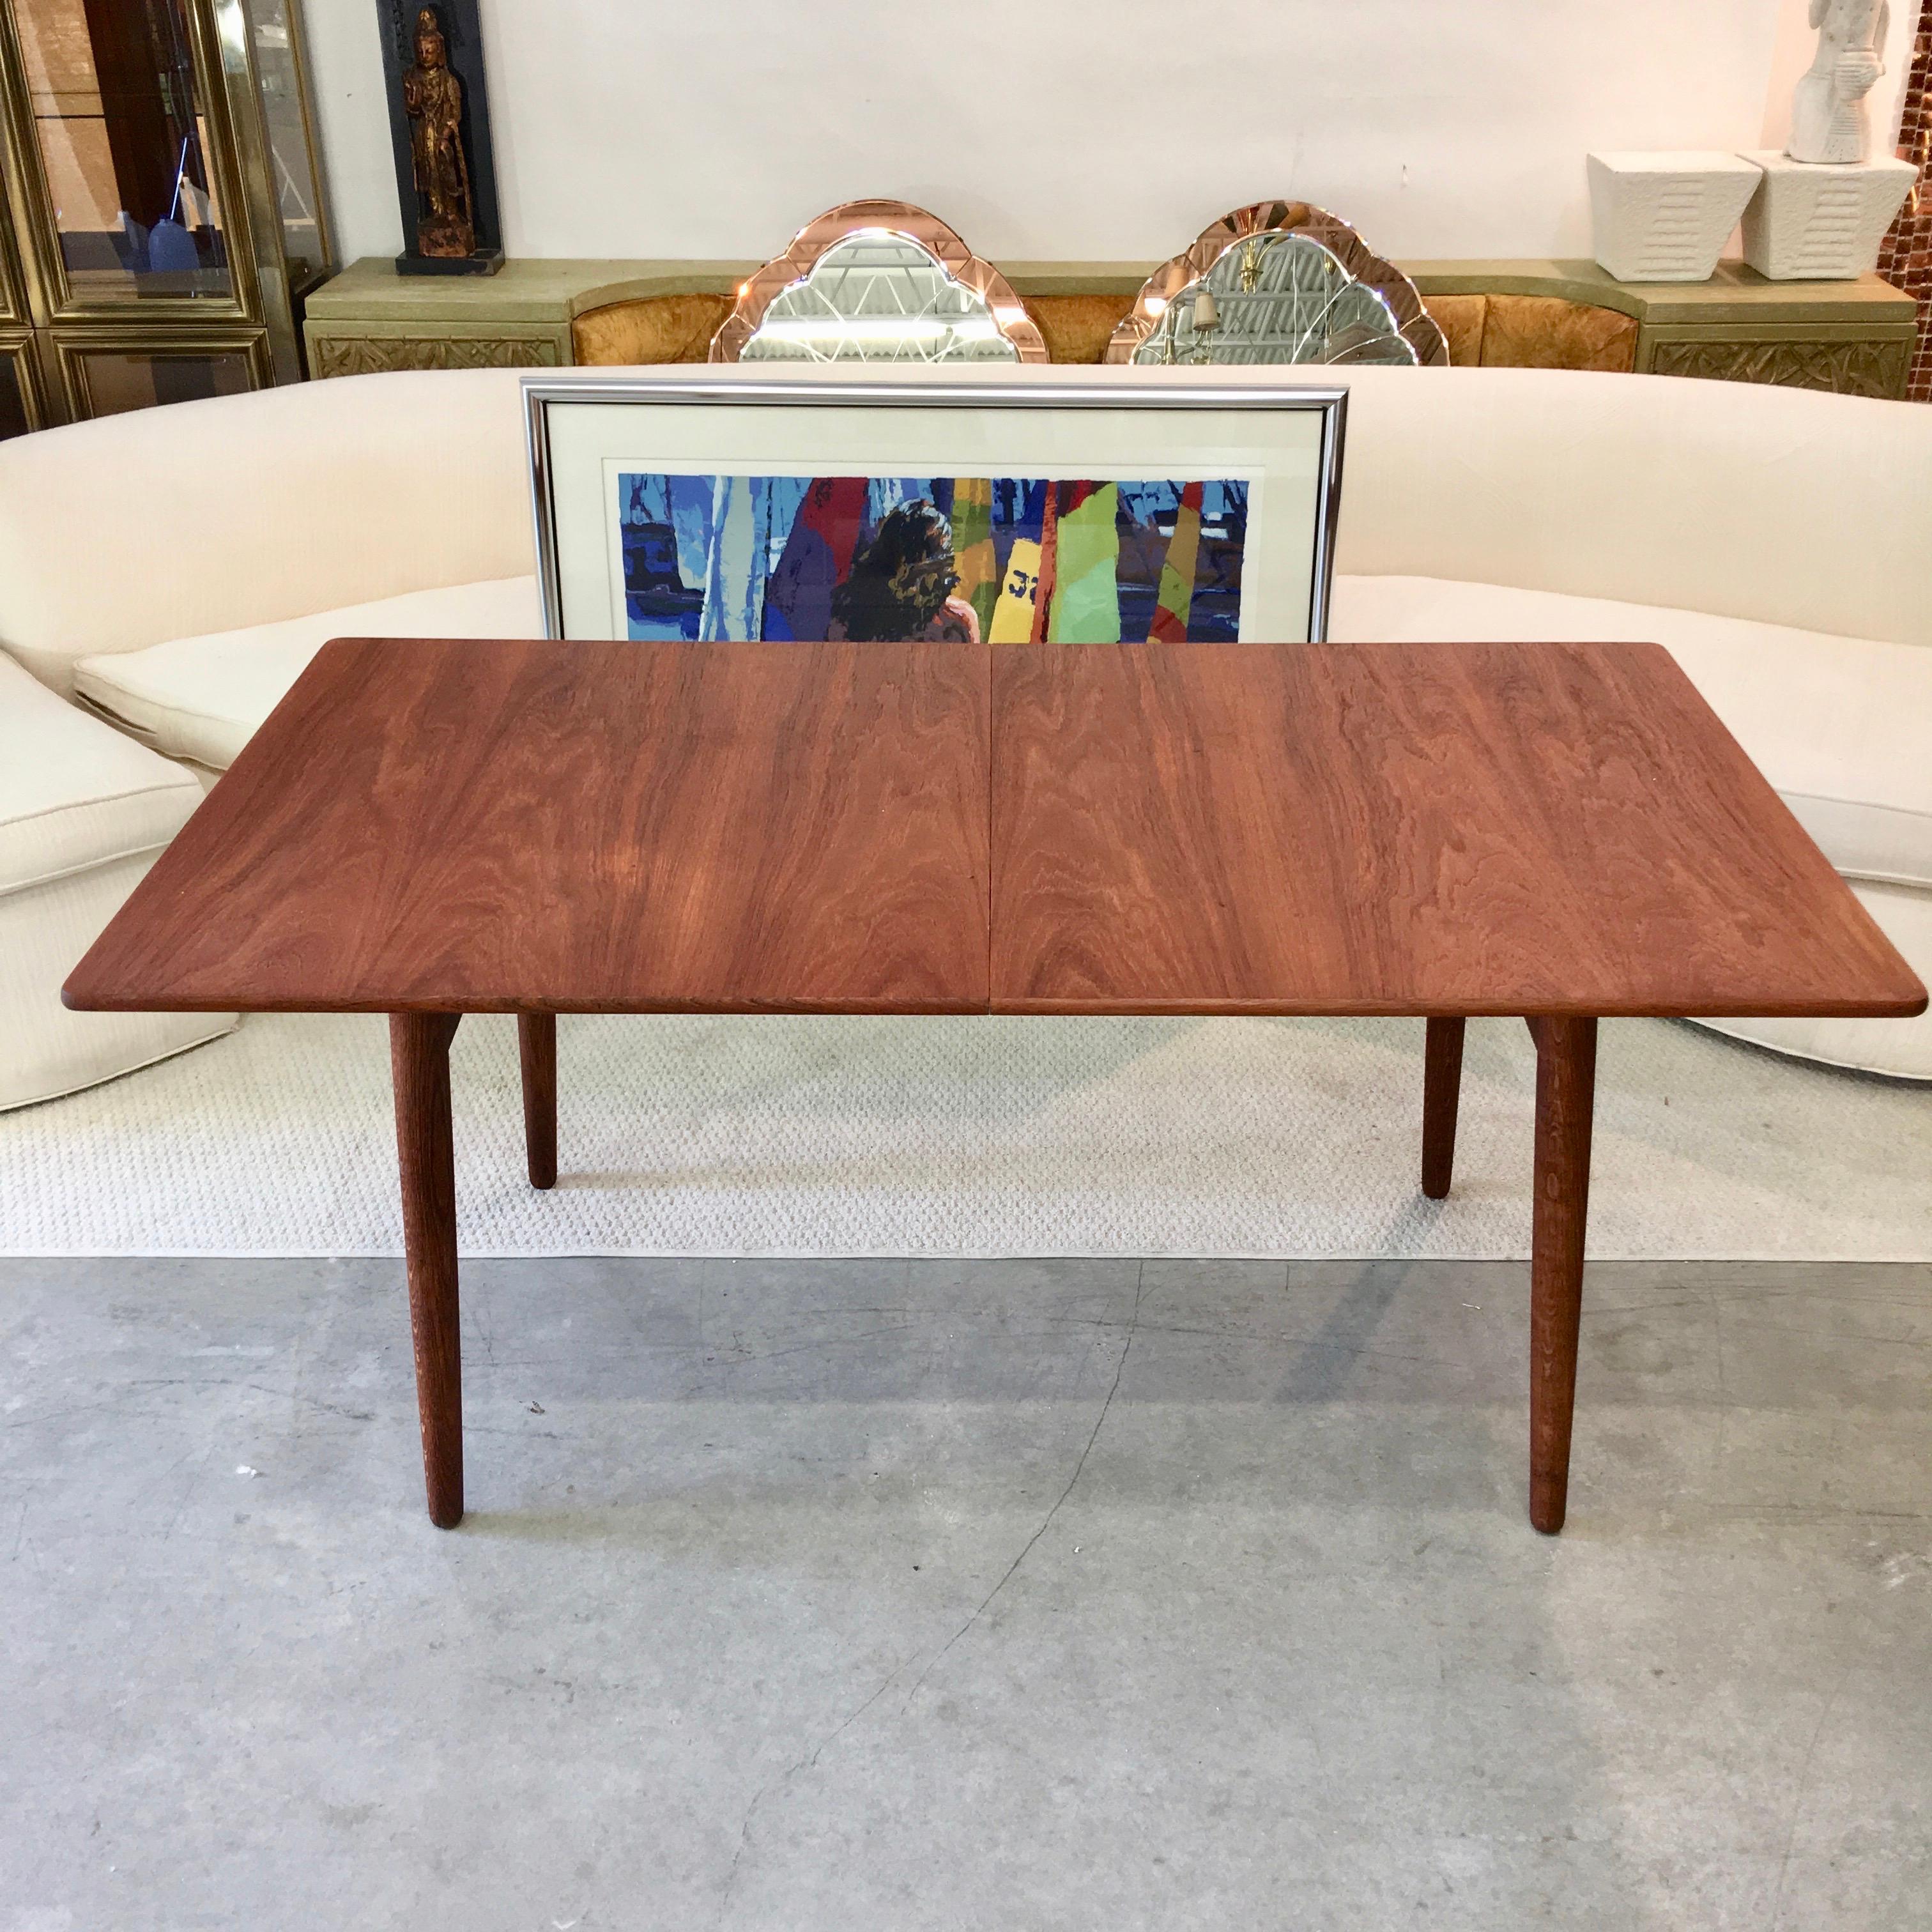 Model AT310 dining table by Hans J. Wegner (1914-2007) for Andreas Tuck, Denmark. Oil rubbed teak top with two 16